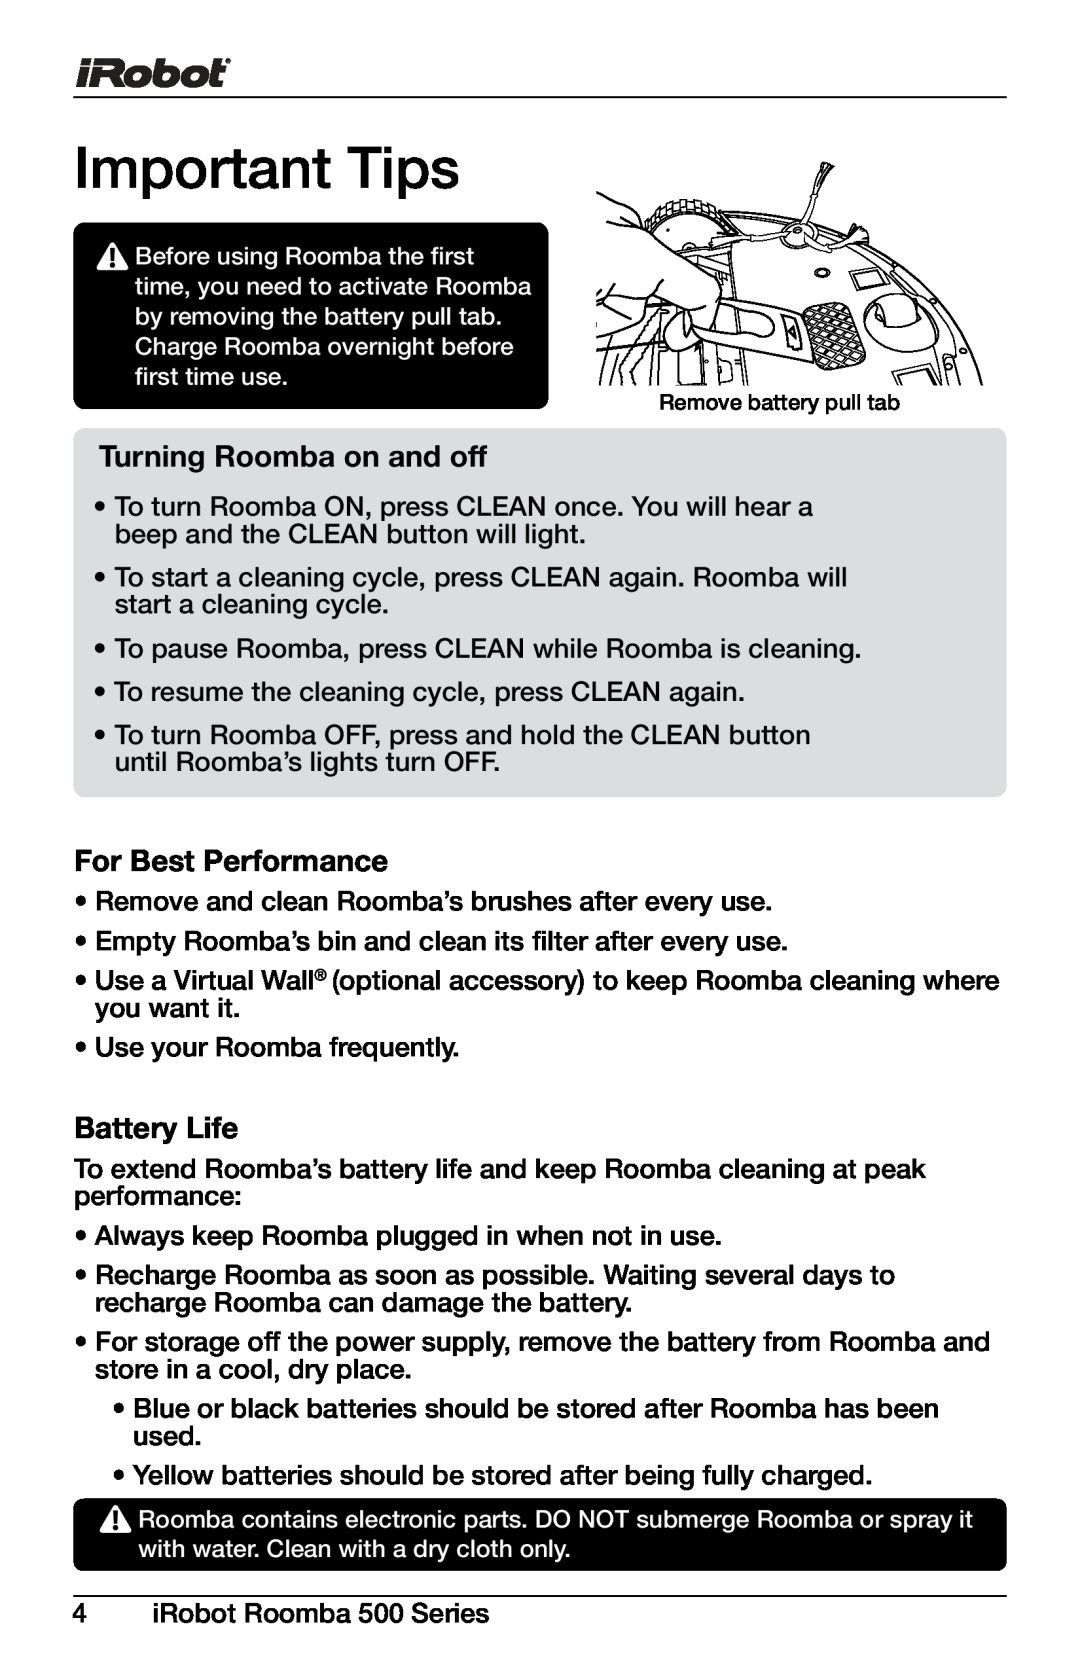 iRobot 563, 611, 571, 560, 540, 565, 536, 530, 580 Important Tips, Turning Roomba on and off, For Best Performance, Battery Life 